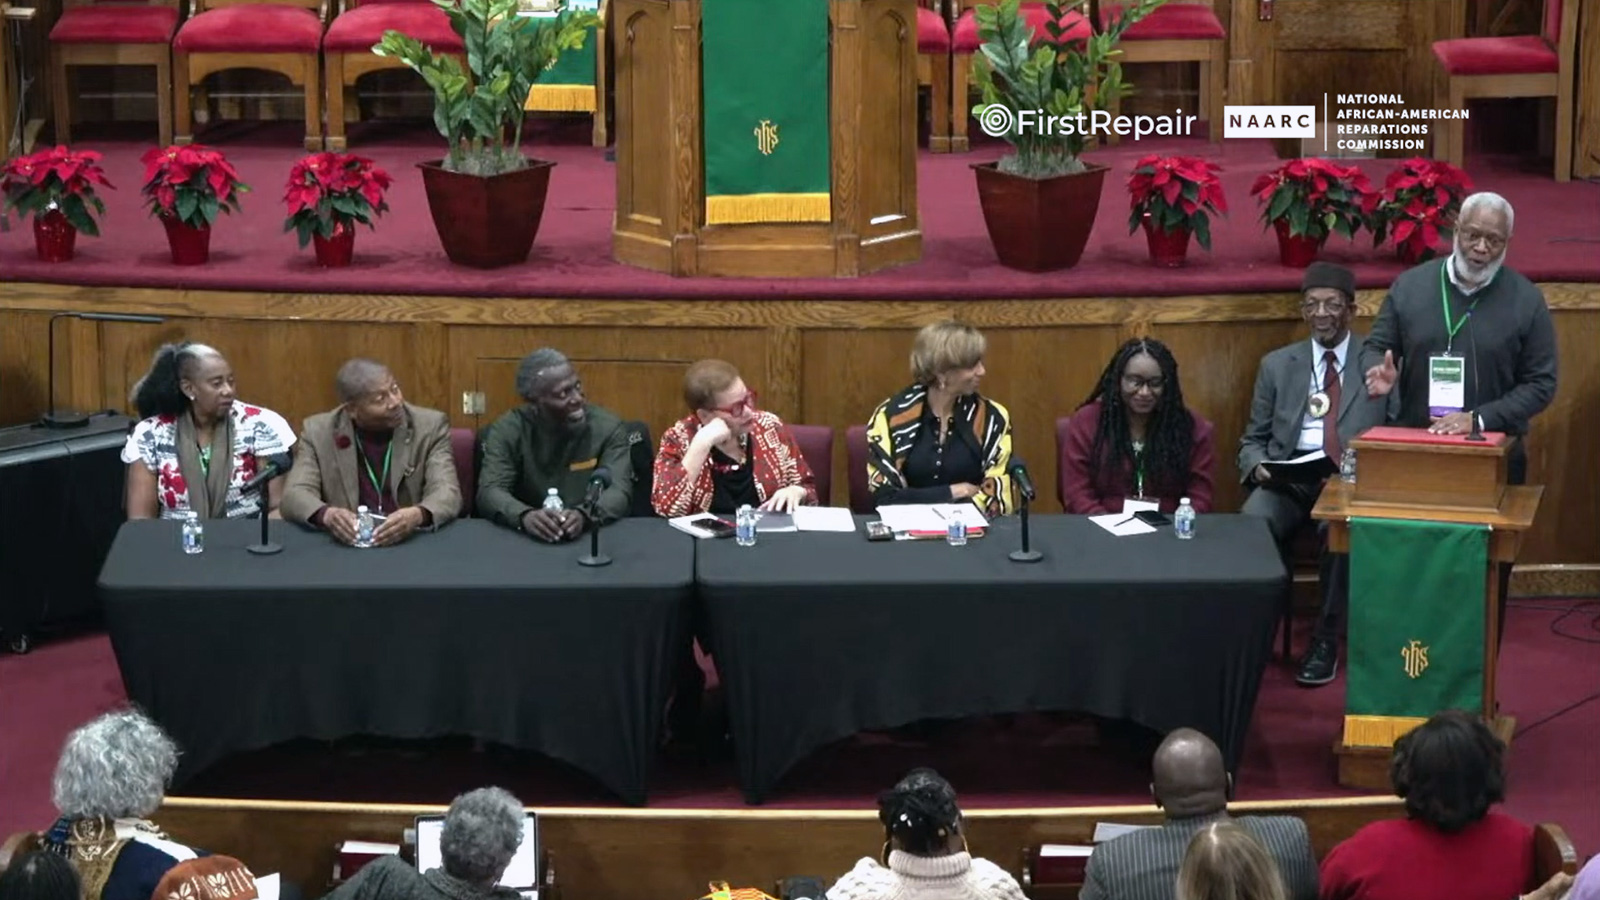 Friday December 1, 2023 — Streamed live from the historic Second Baptist Church, Evanston, IL, “Local and State Reparations: Repairing Black Communities” A National Town Hall Meeting presented by FirstRepair and The National African American Reparations Commission (NAARC).